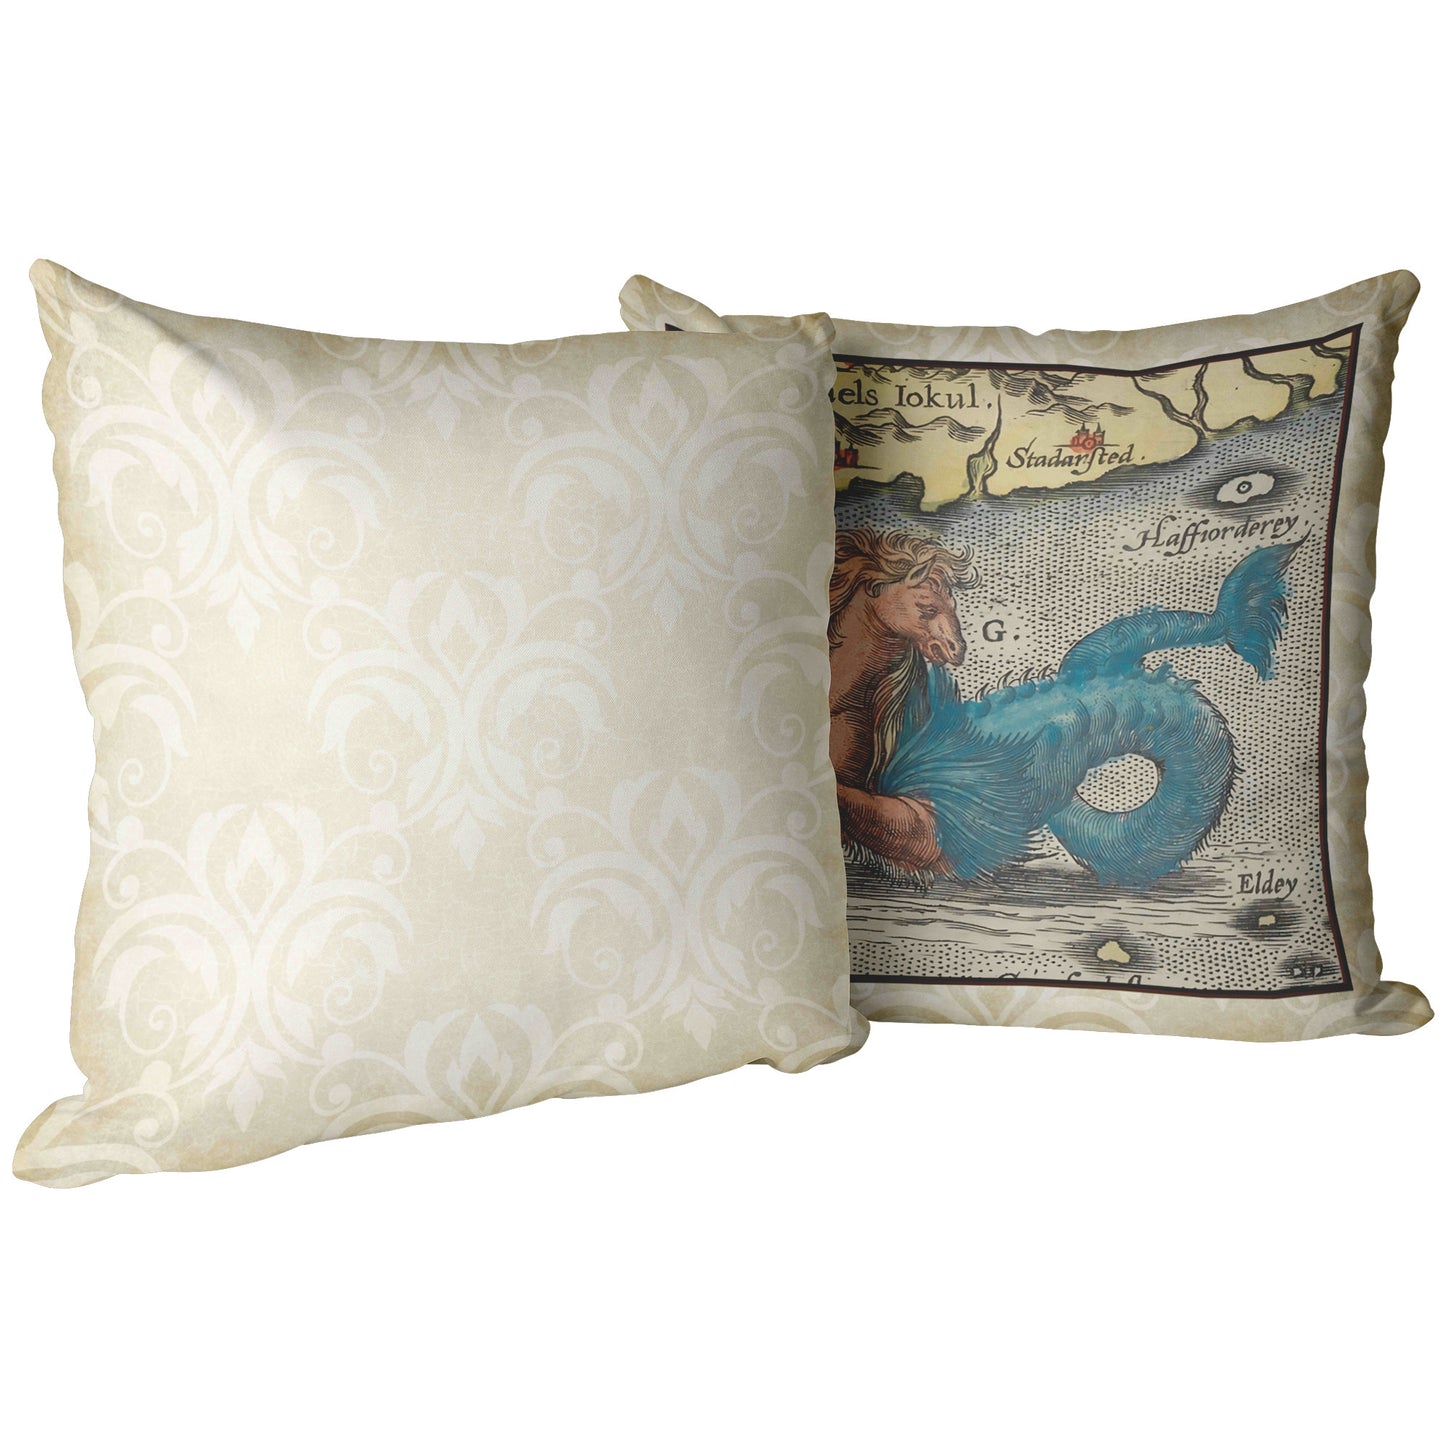 Sea Monster Throw Pillow - Hippocampus Color